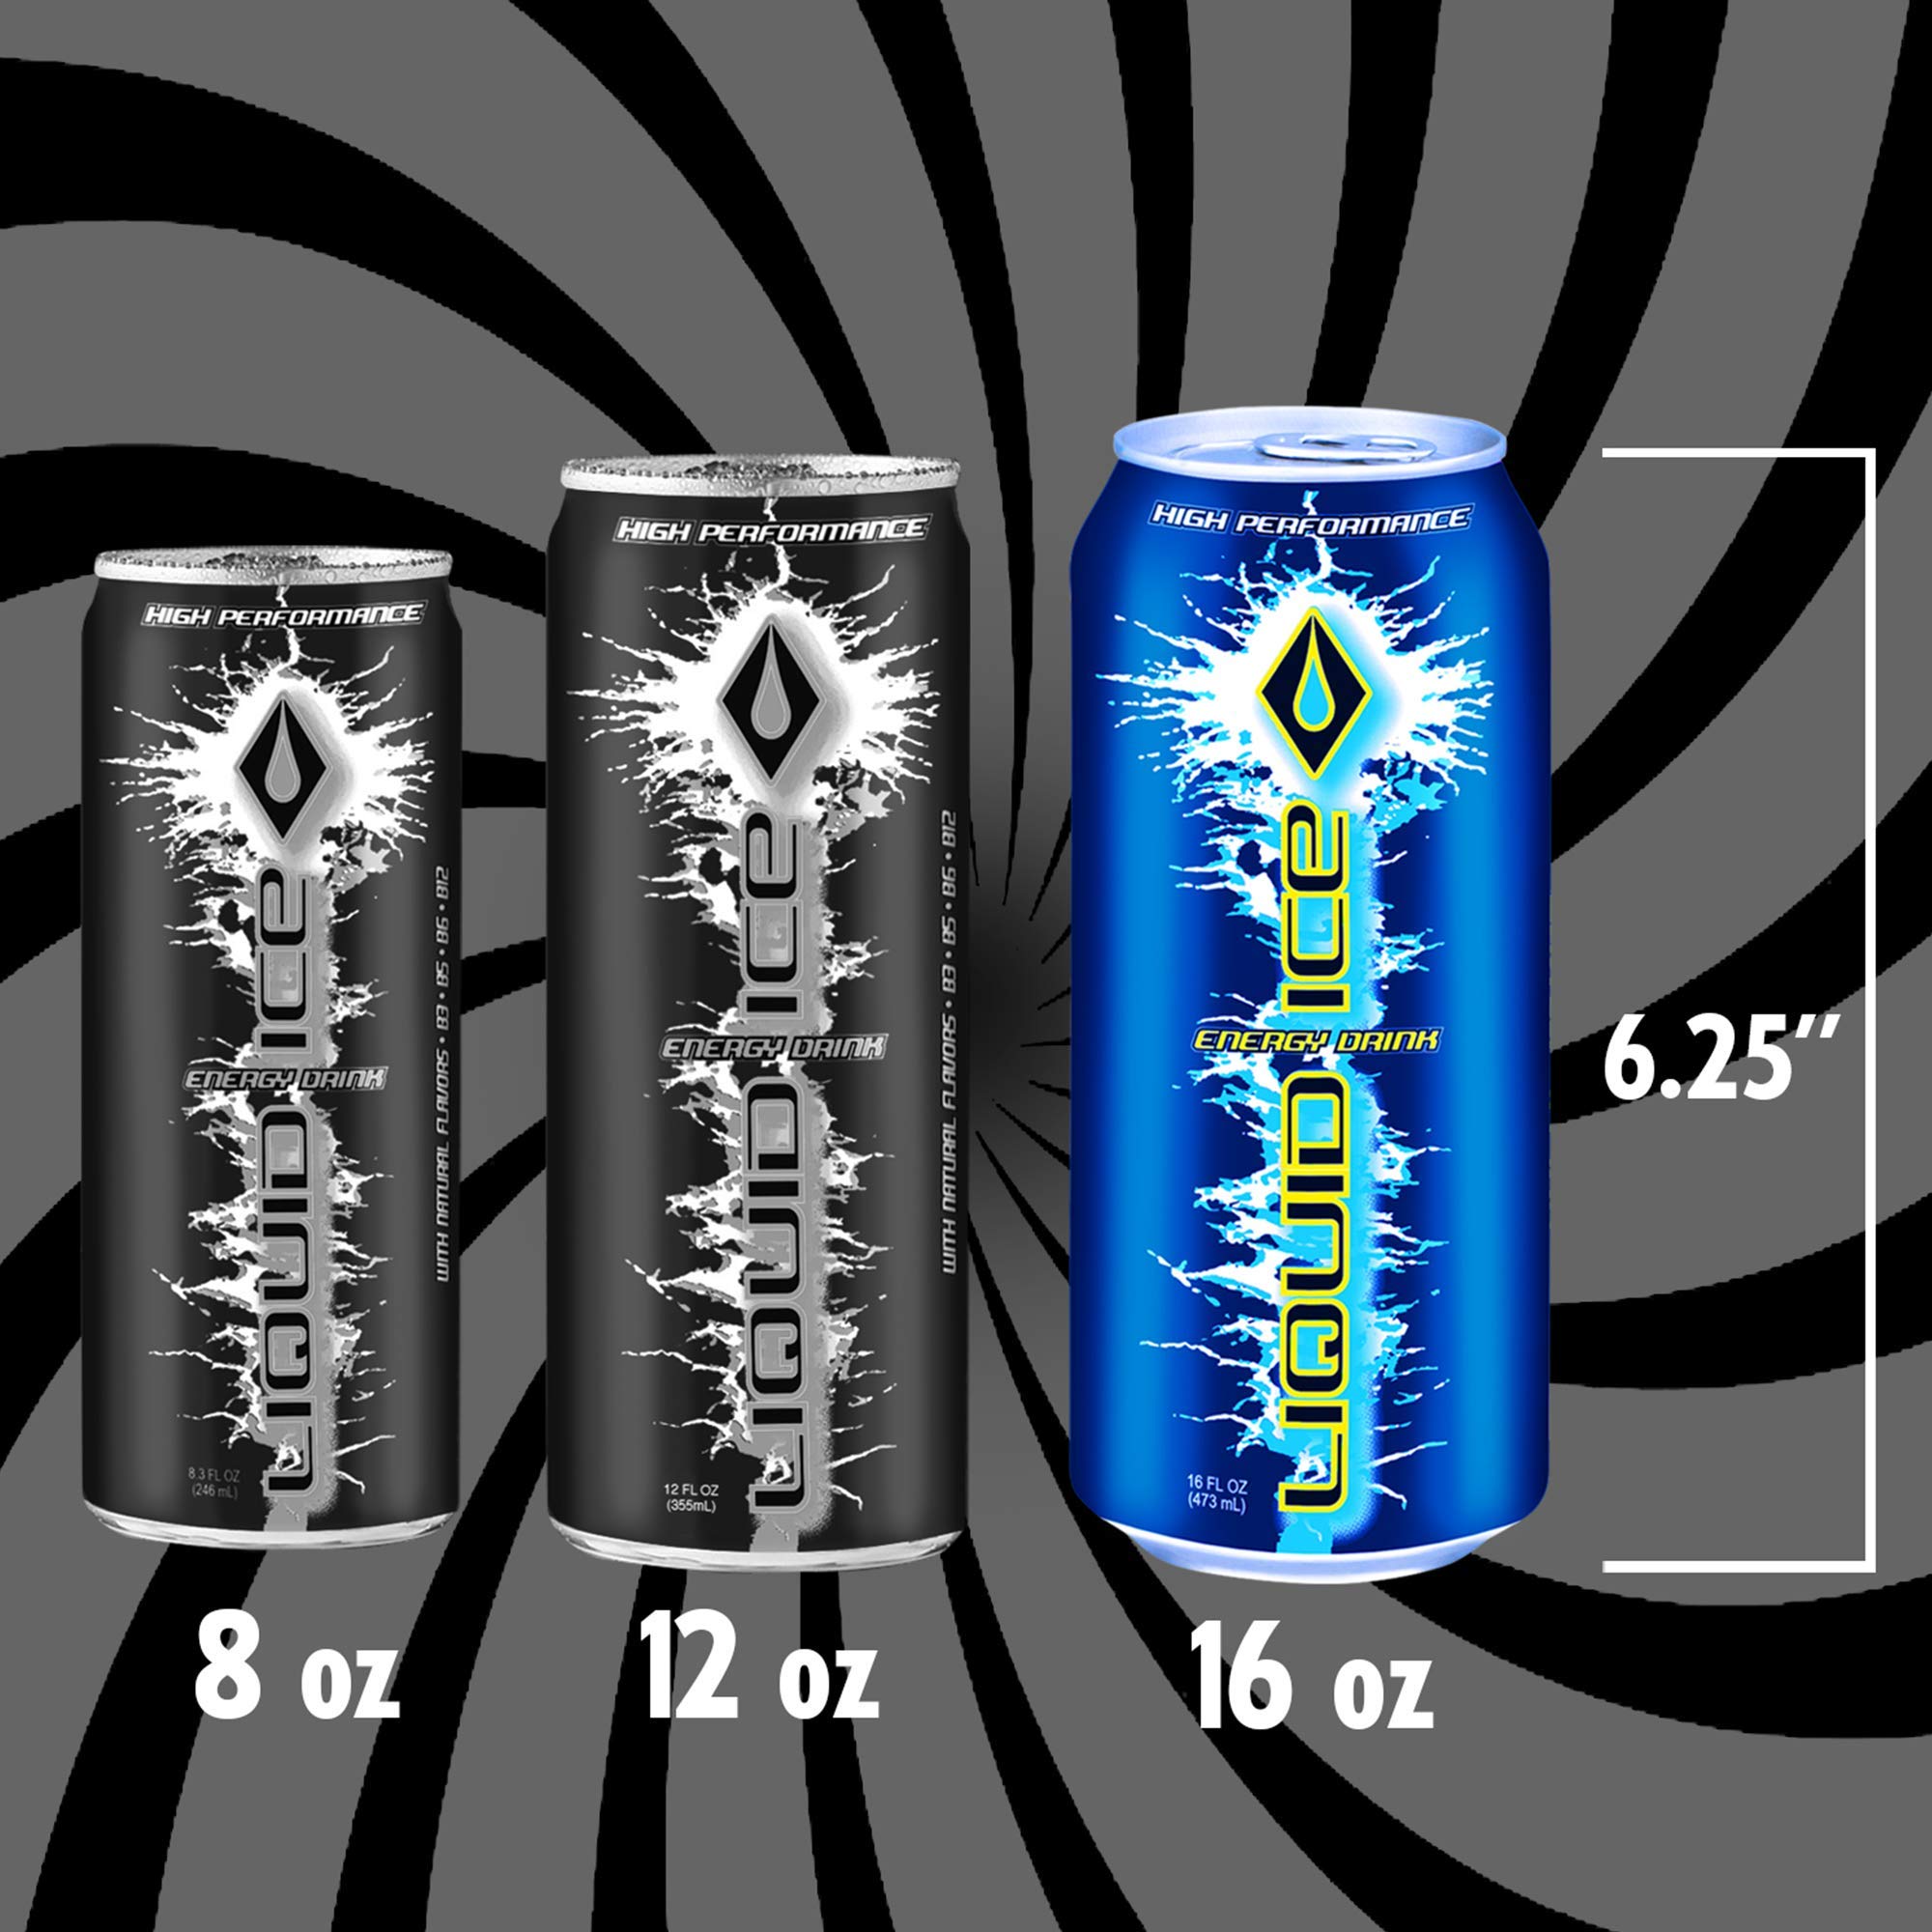 Liquid Ice Energy Drinks: Energize Your Day